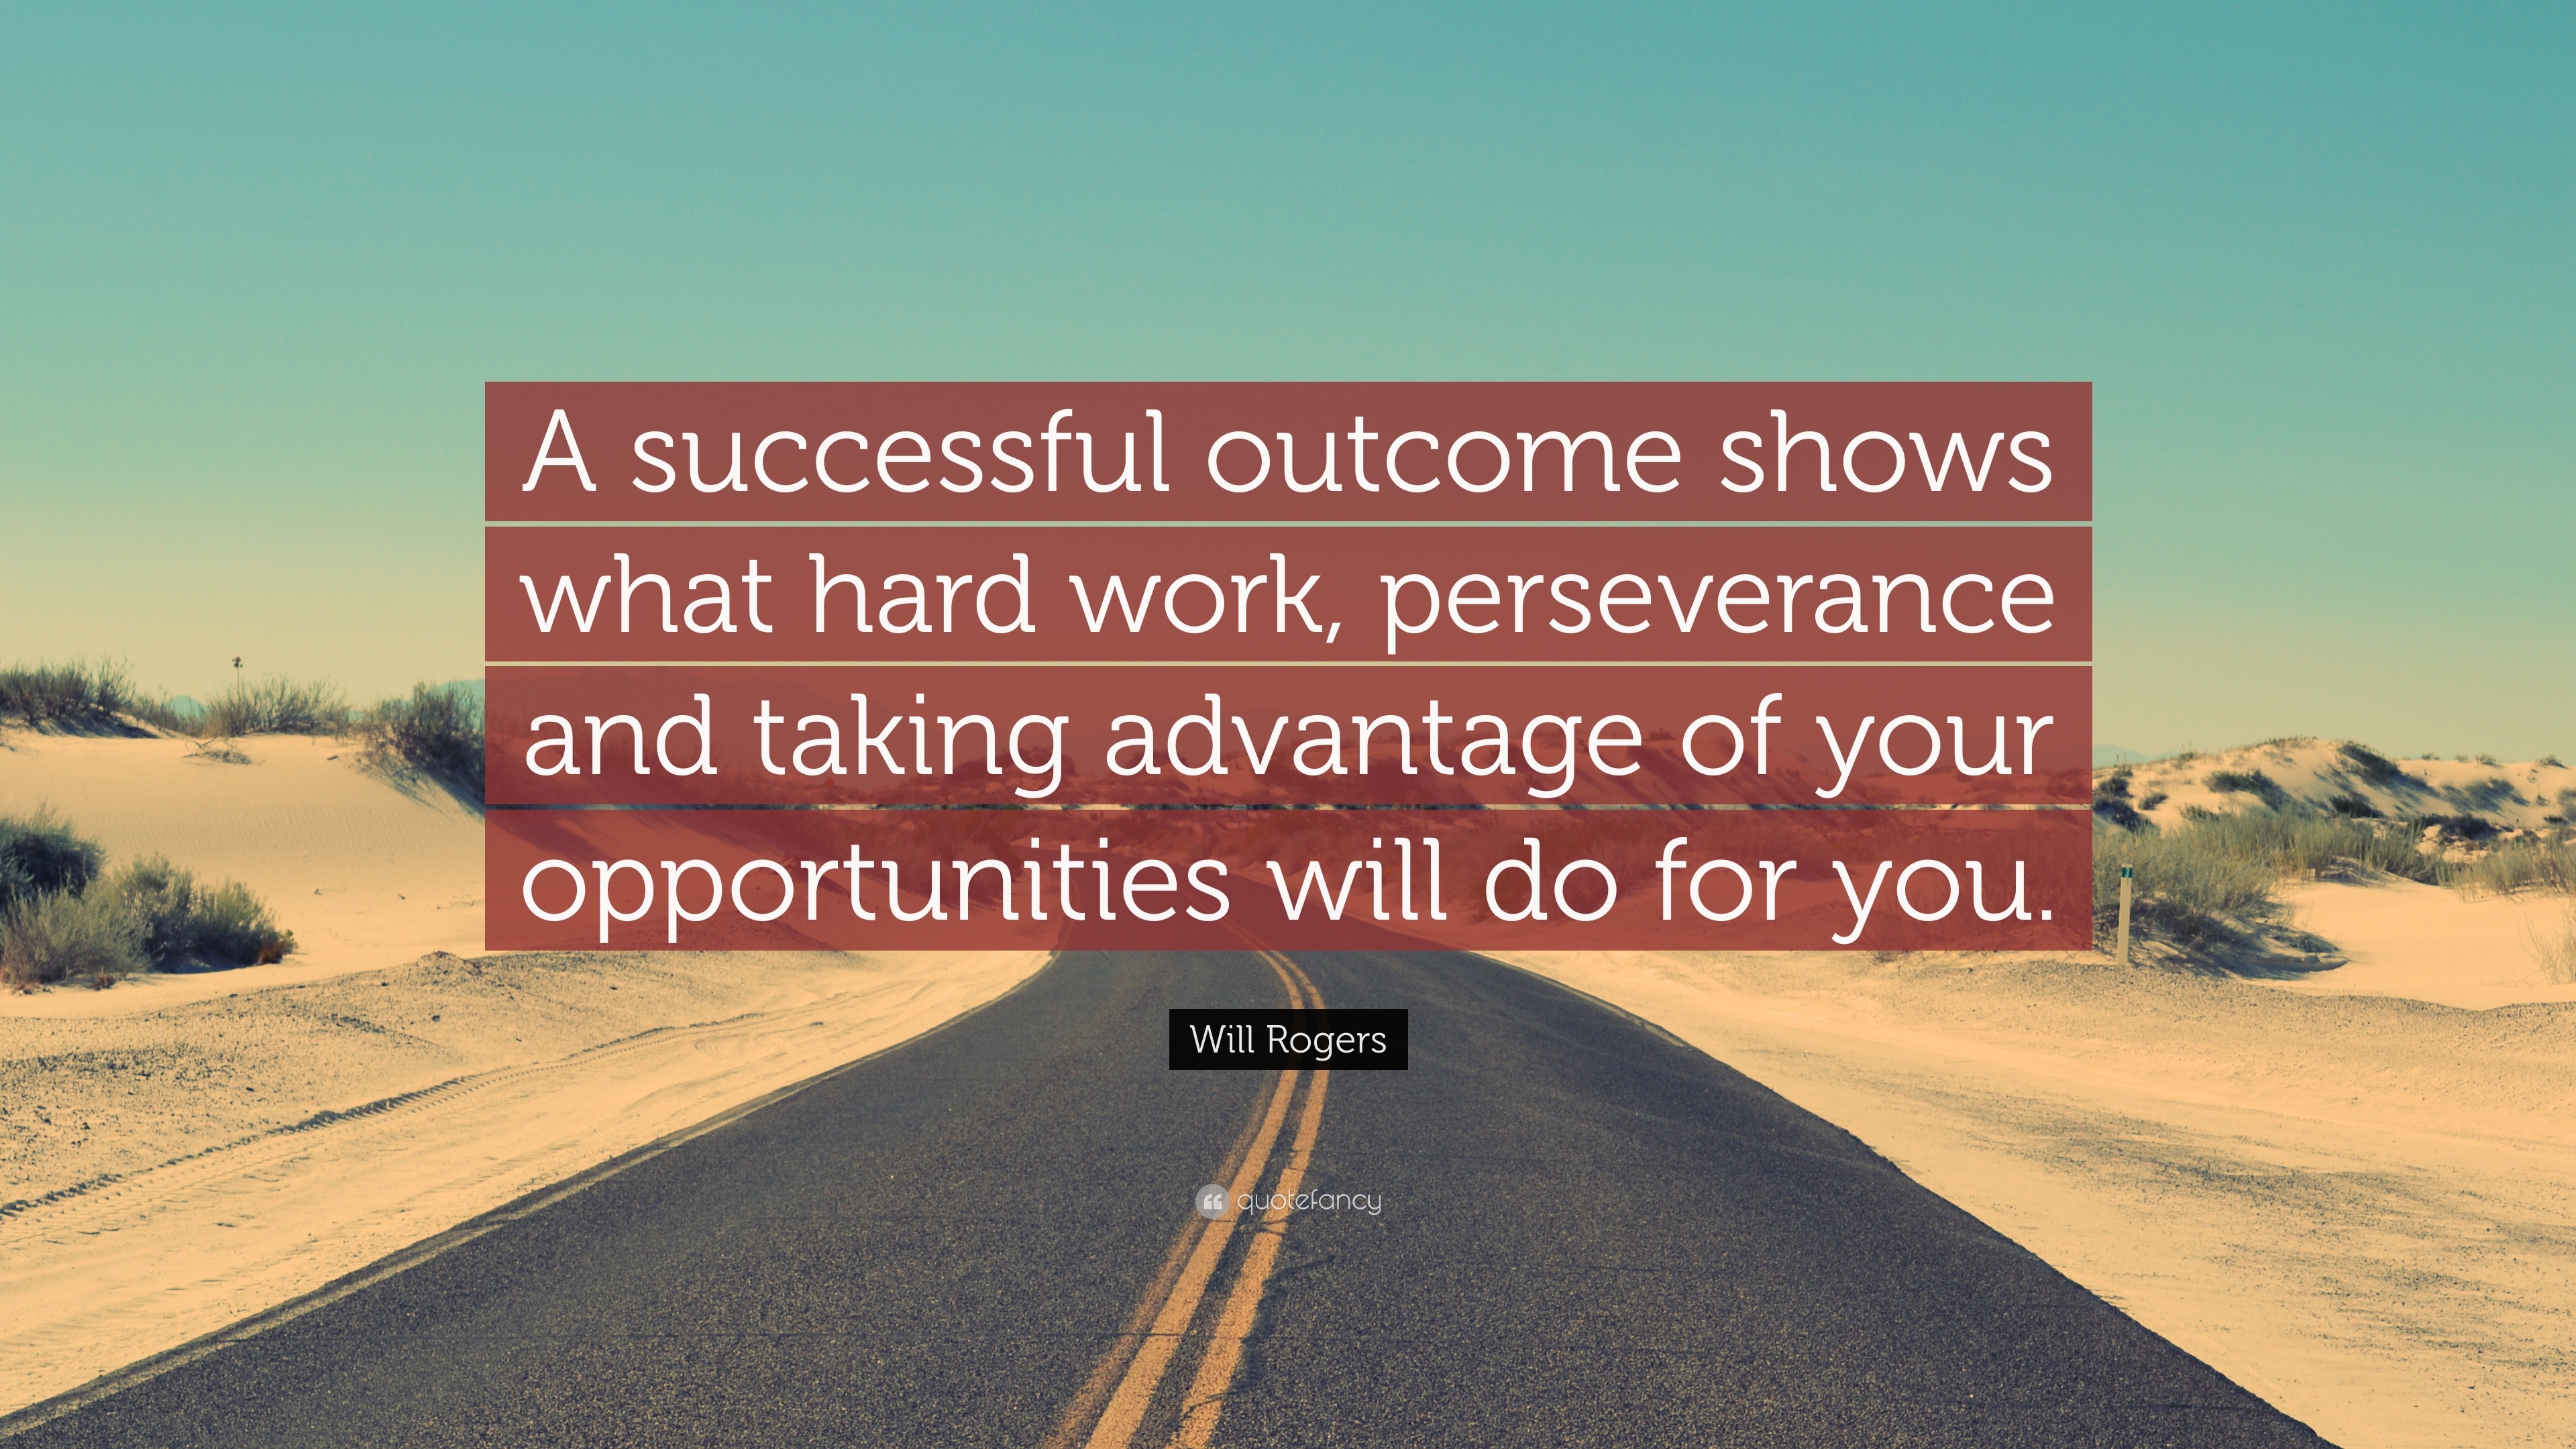 Will Rogers Quote: “A successful outcome shows what hard work